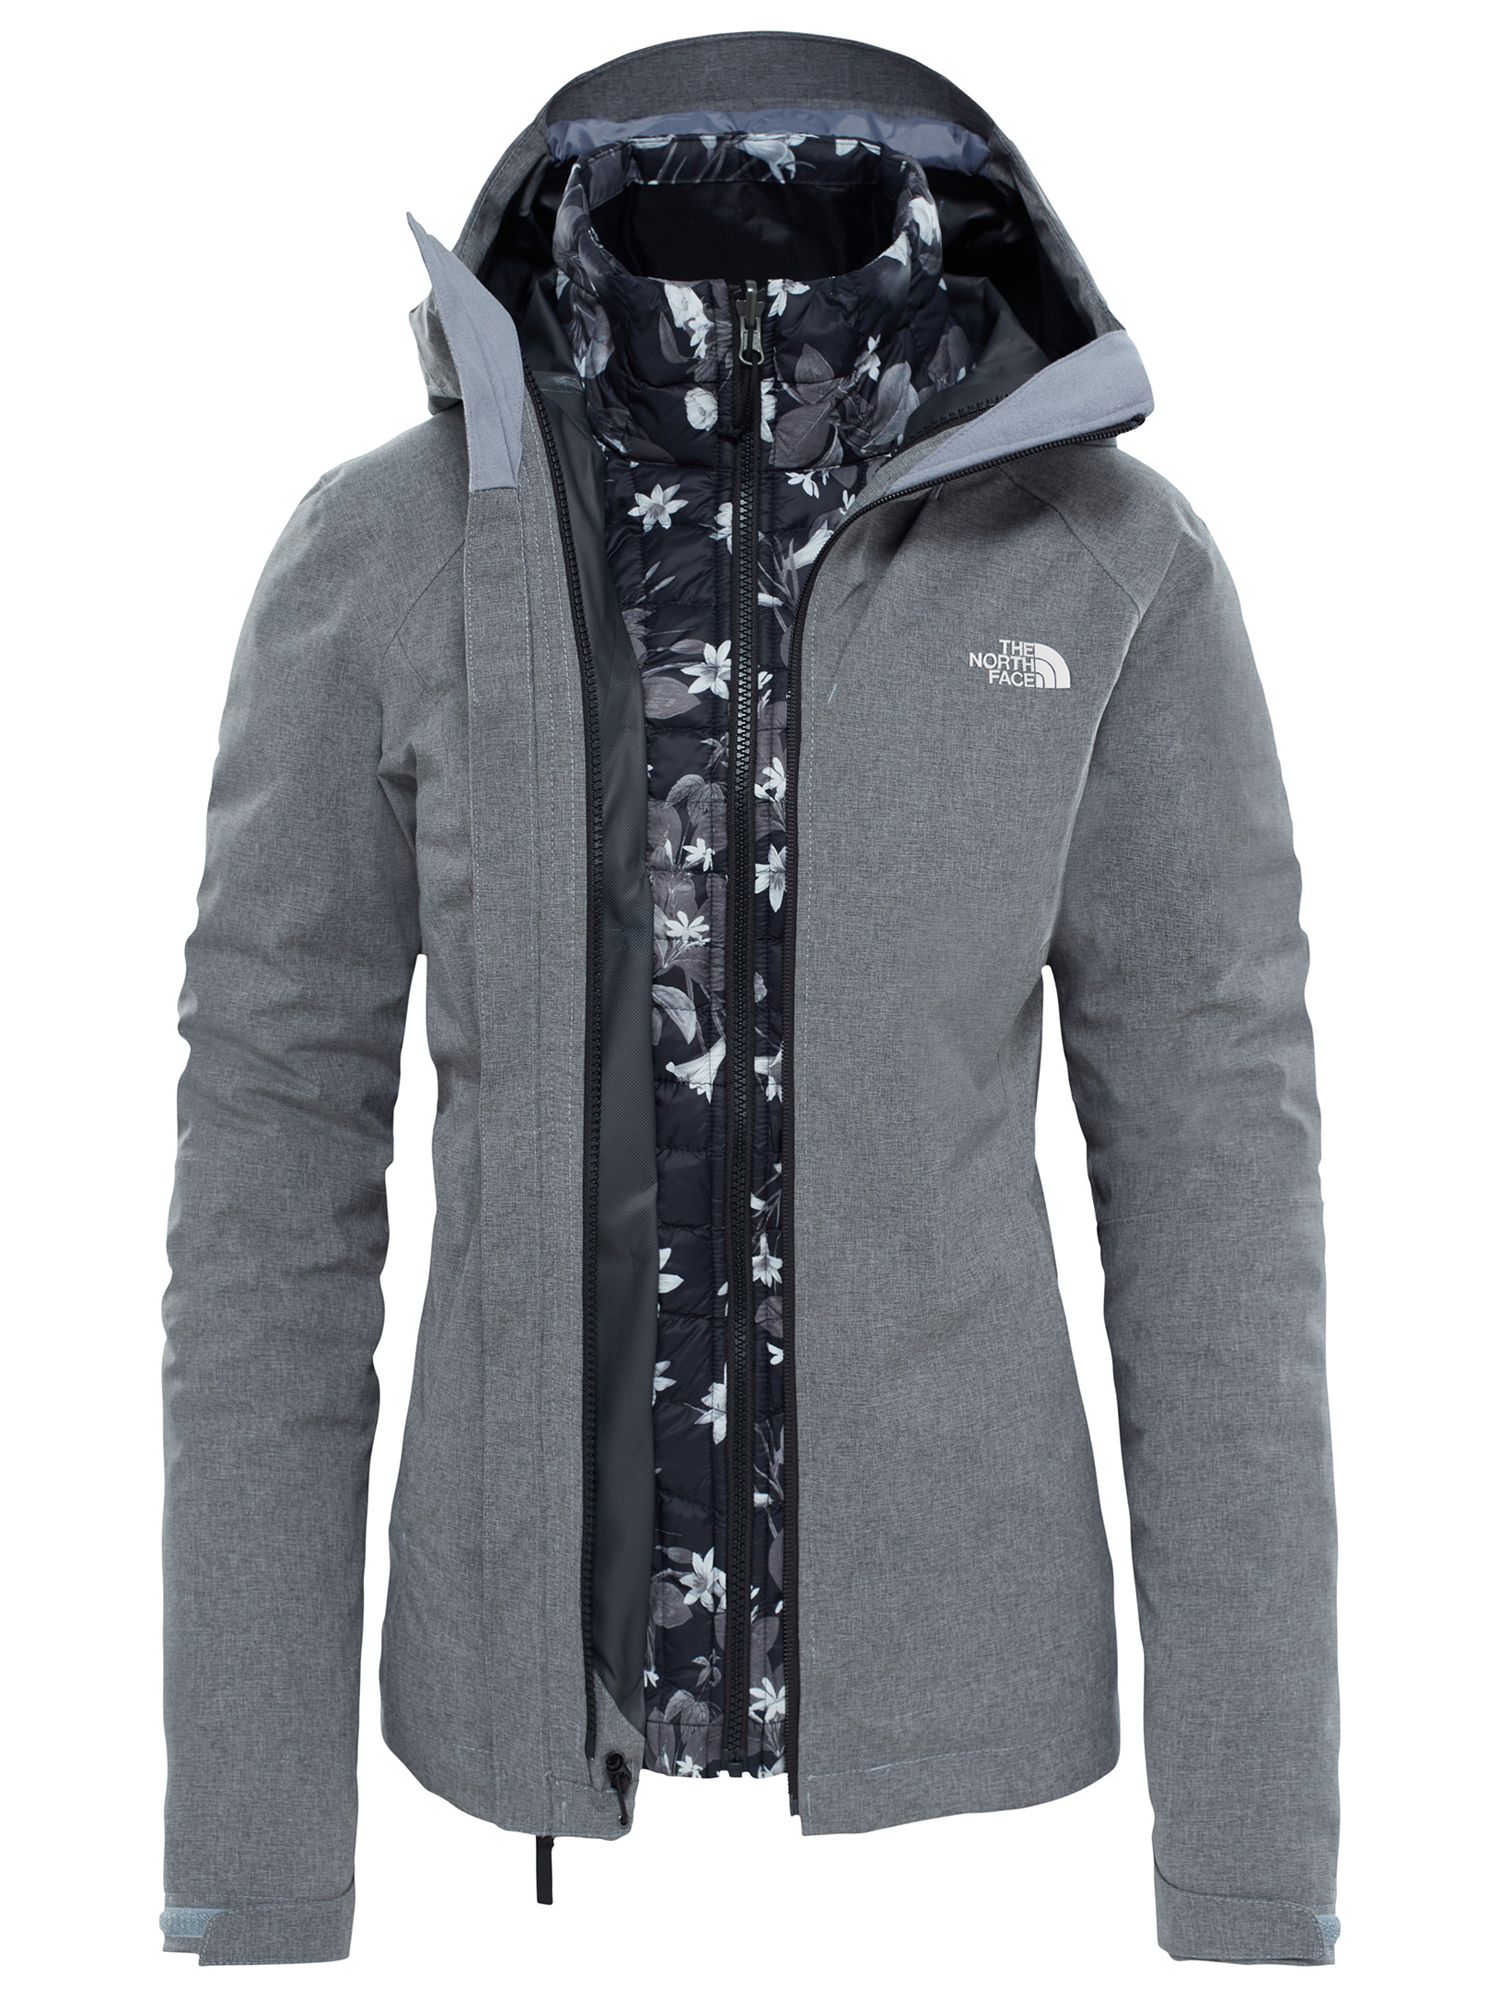 north face selsley triclimate jacket